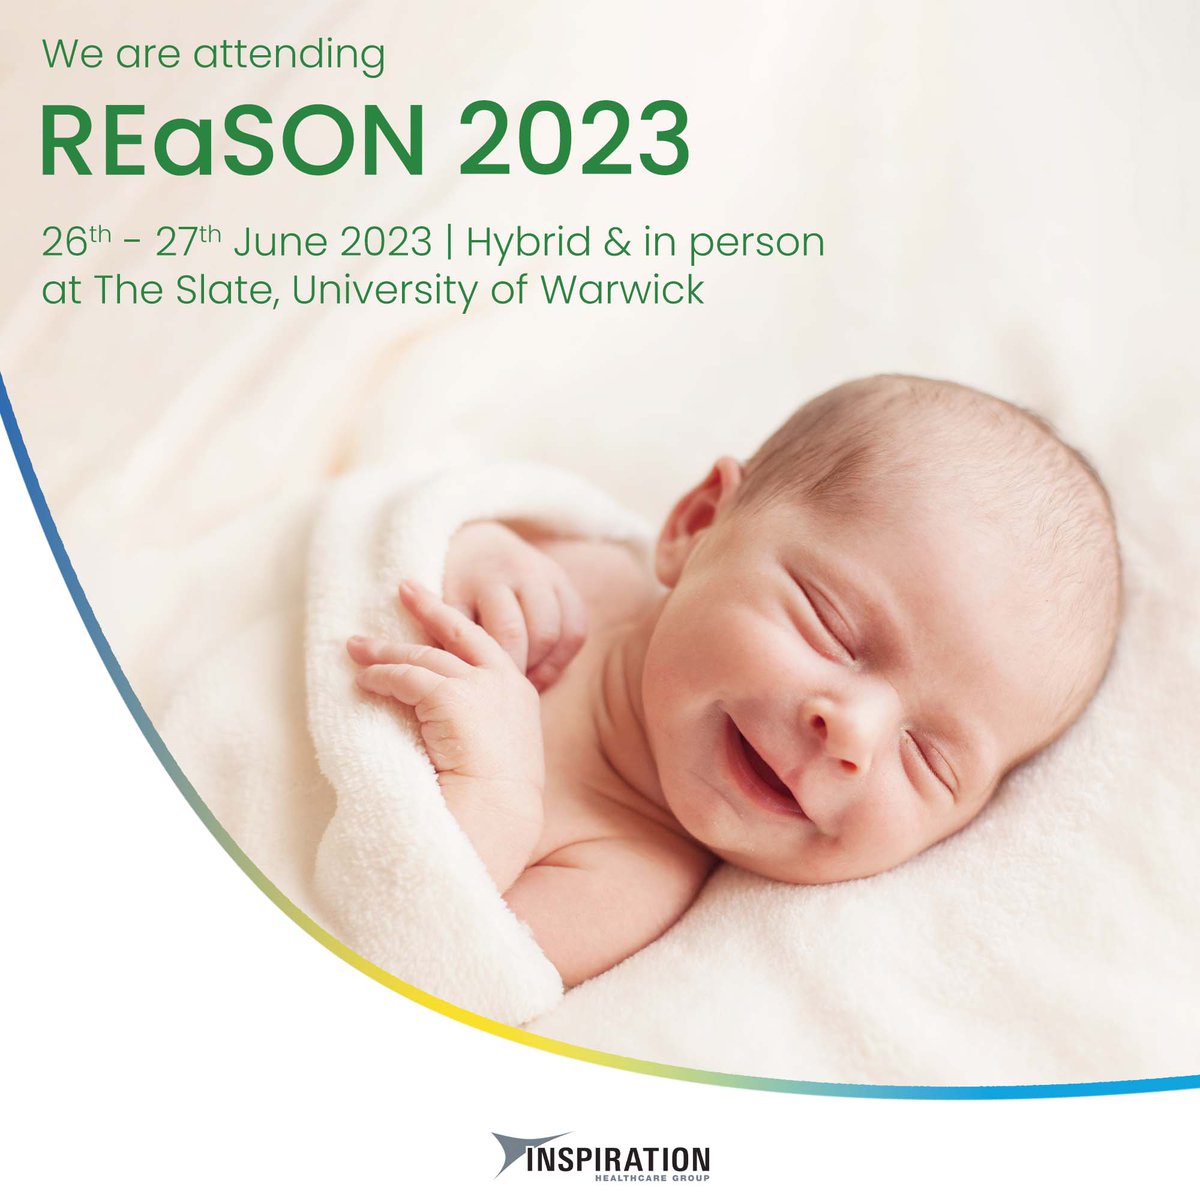 IHC Group are excited to announce we will be attending this year's REaSoN meeting.
This hybrid event is taking place at the Slate at the University of Warwick.
We will be showcasing our neonatal product portfolio and Genedrive®
Are you going?
#WeAreInspiration #reason2023